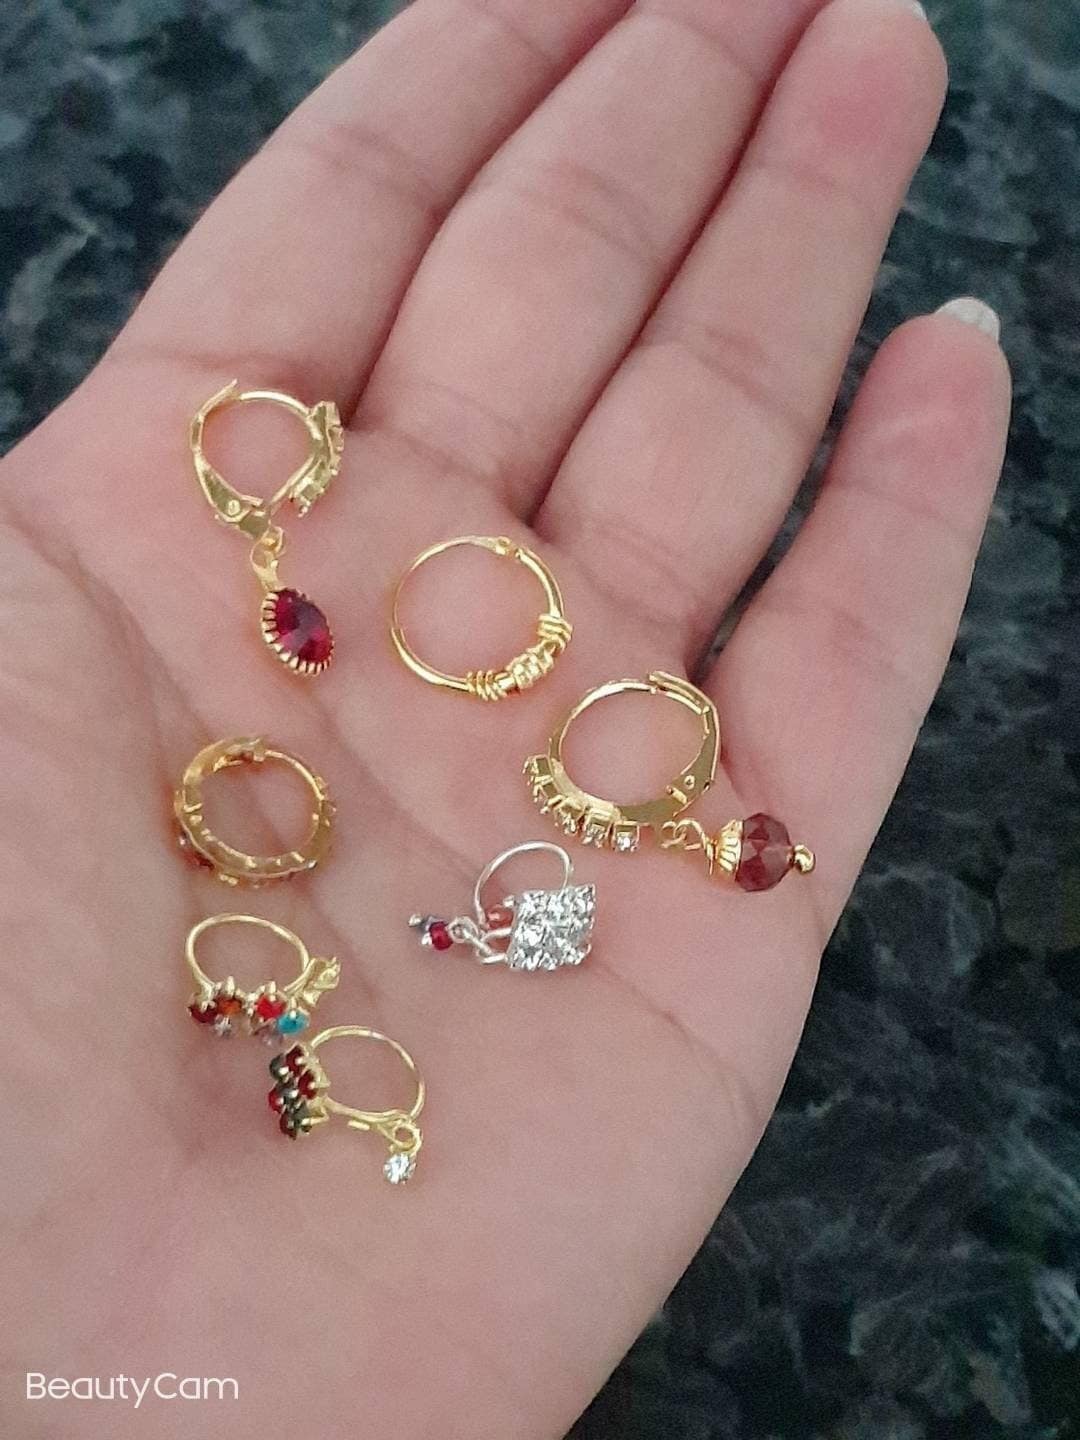 7 pieces Nose Ring Rose or Yellow gold 14k nose ring, Cartilage, Tragus Helix Nose Ring Small Tiny Seamless Little Sleeper